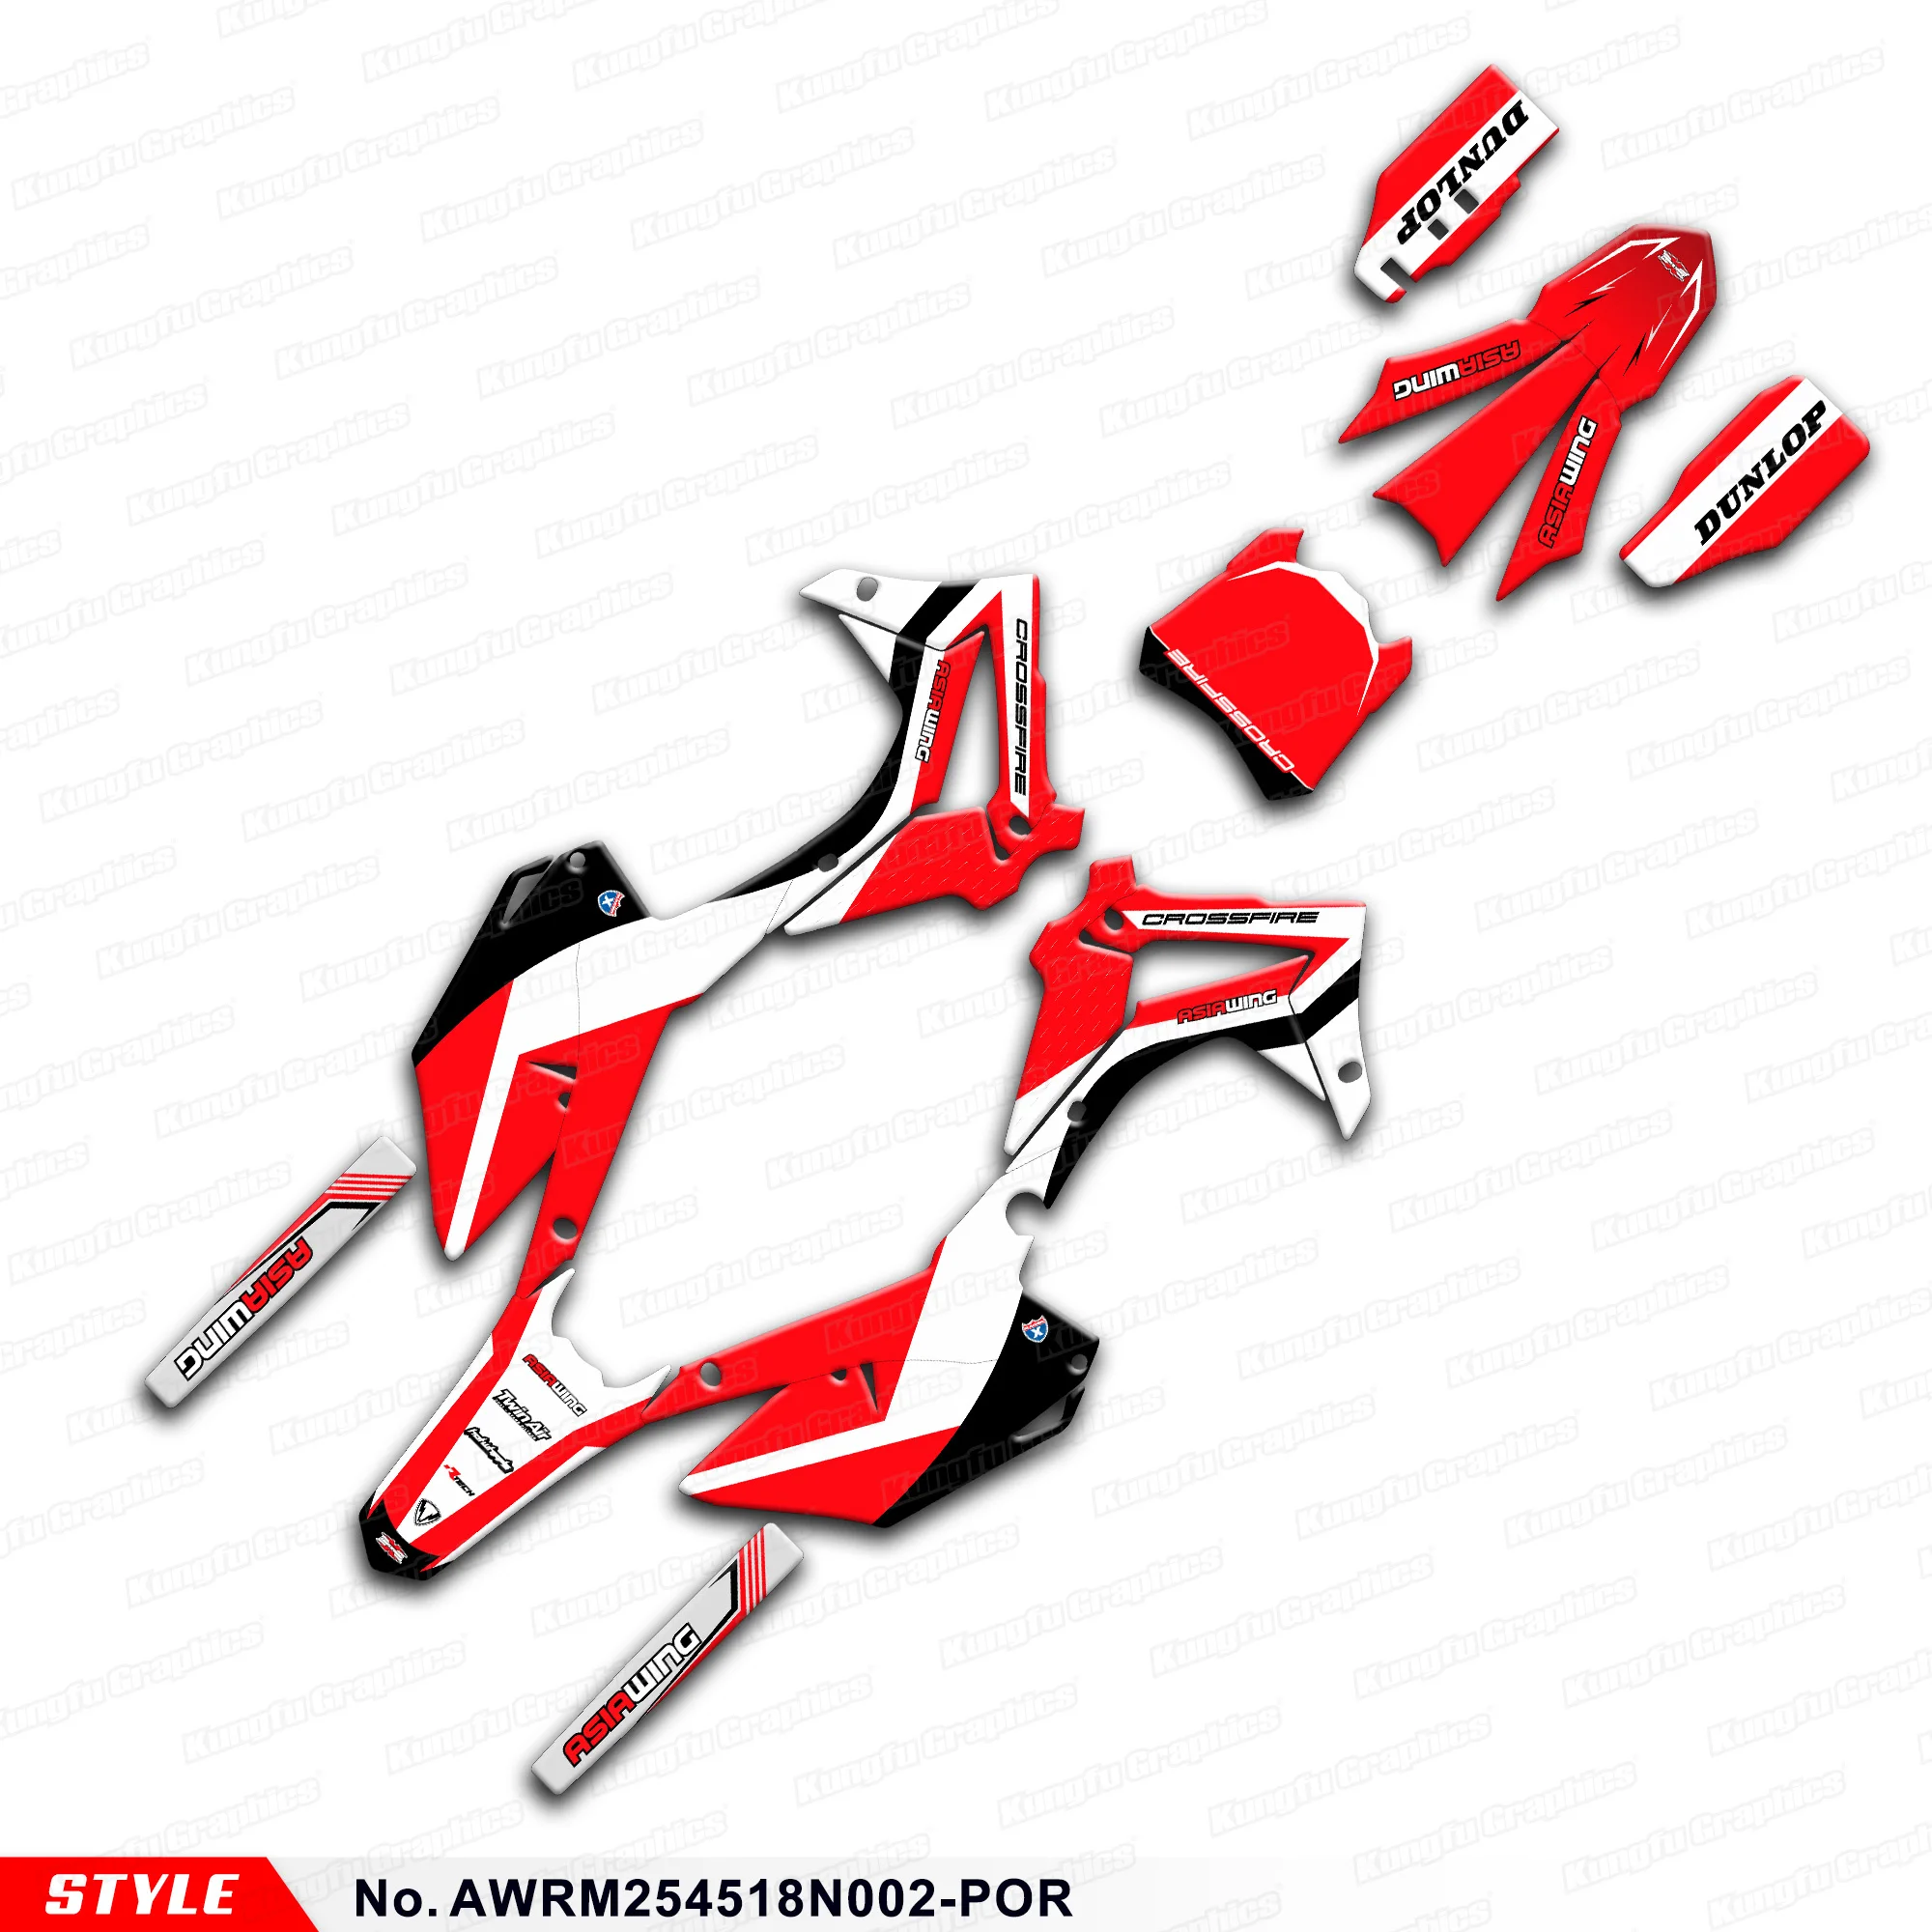 

Aftermarket Graphics MX Sticker Decal for Asiawing LX250 LX450 2018 2019 2020 2021 2022 2023 2024, AWRM254518N002-POR